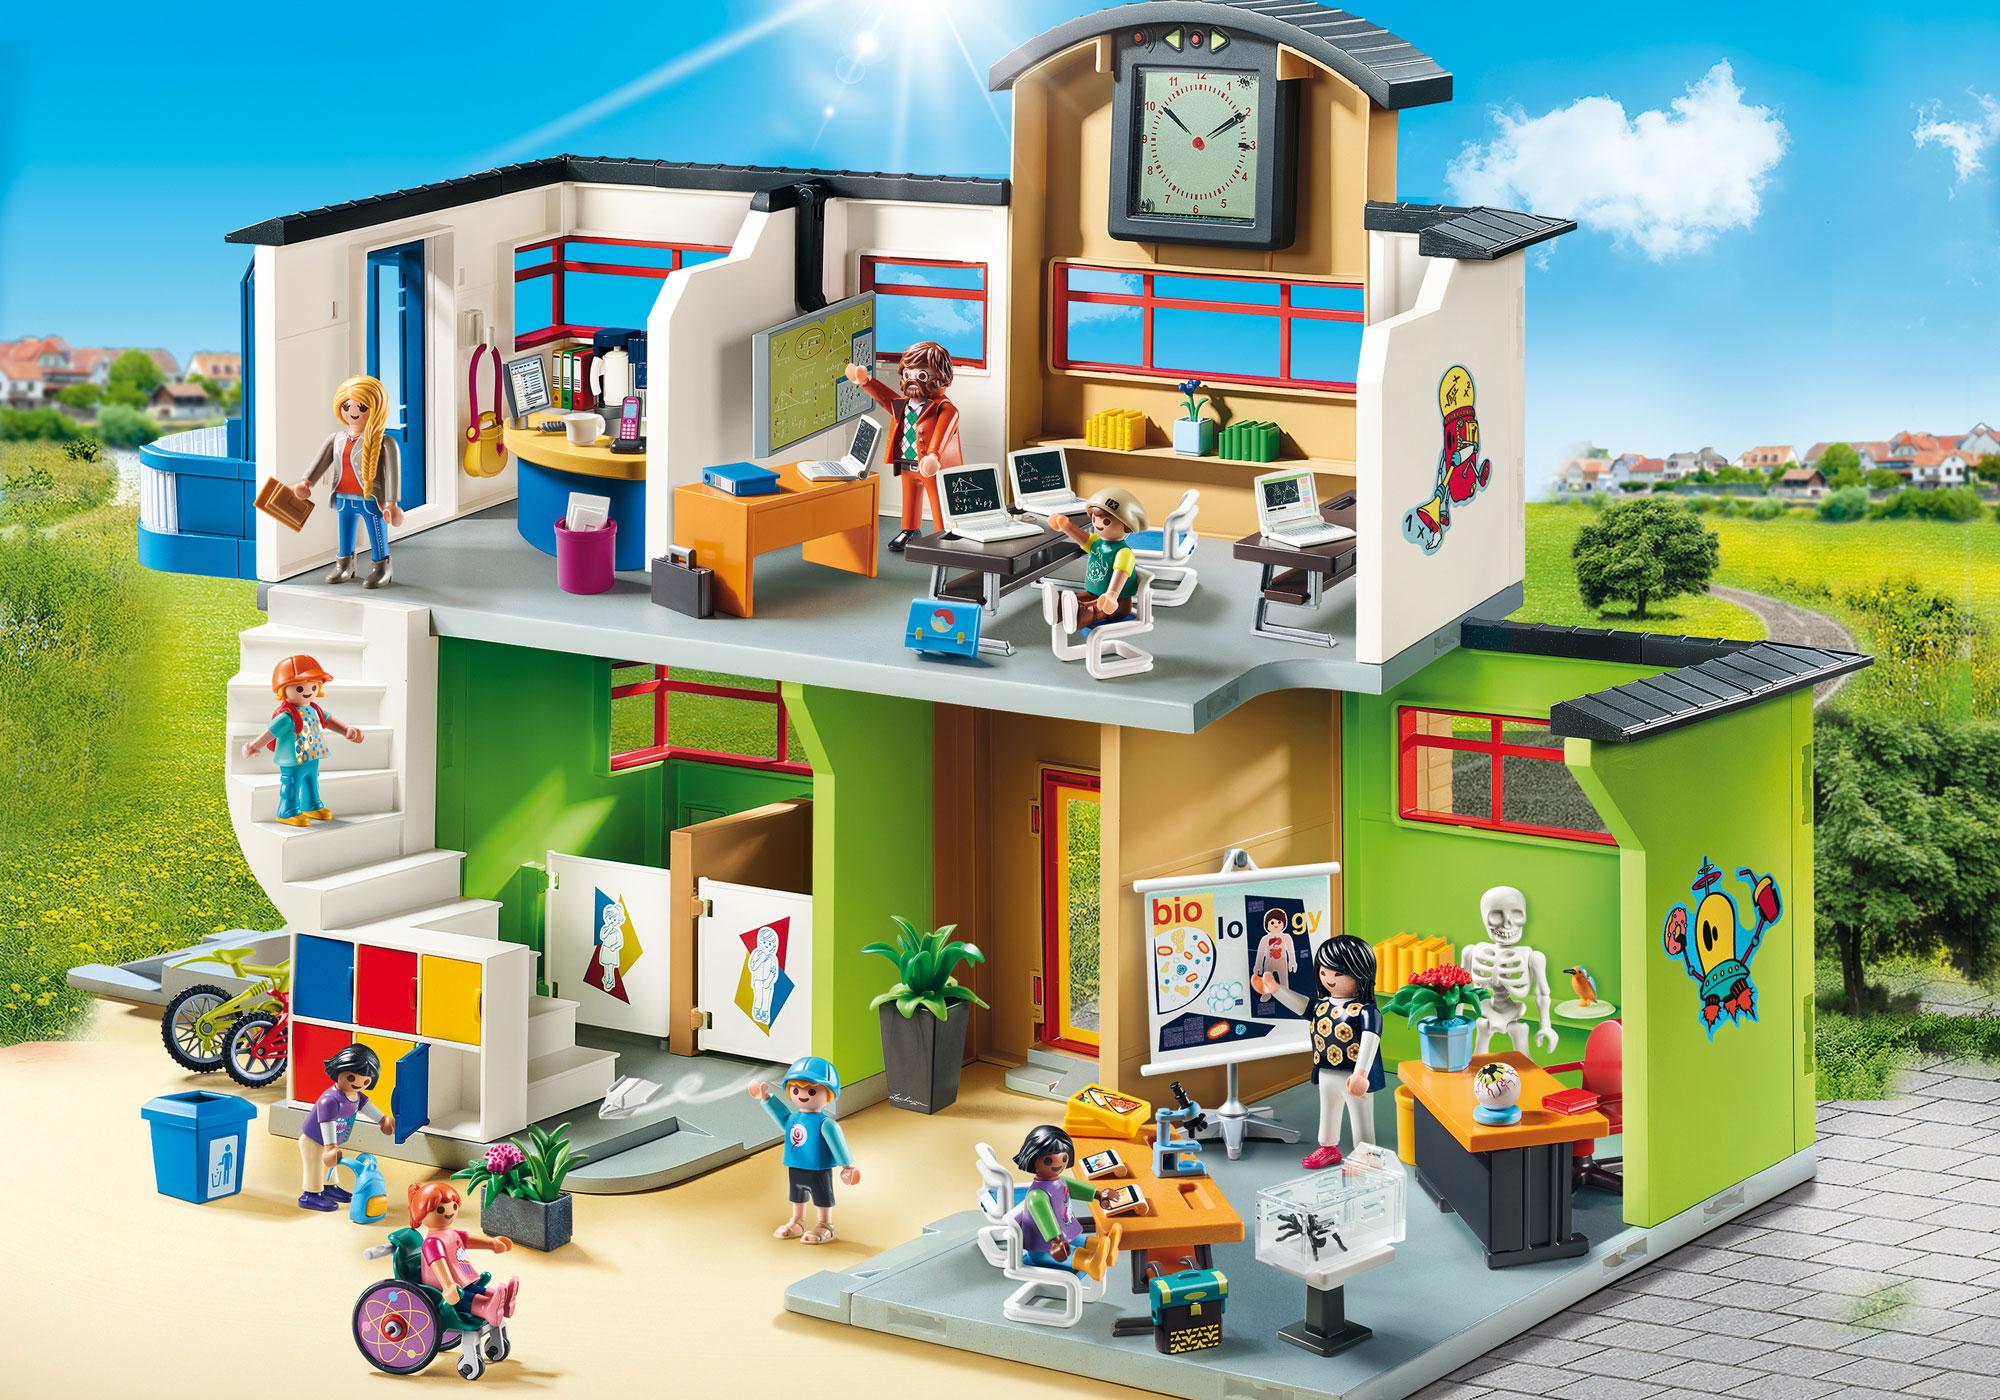 playmobil ecole maternelle